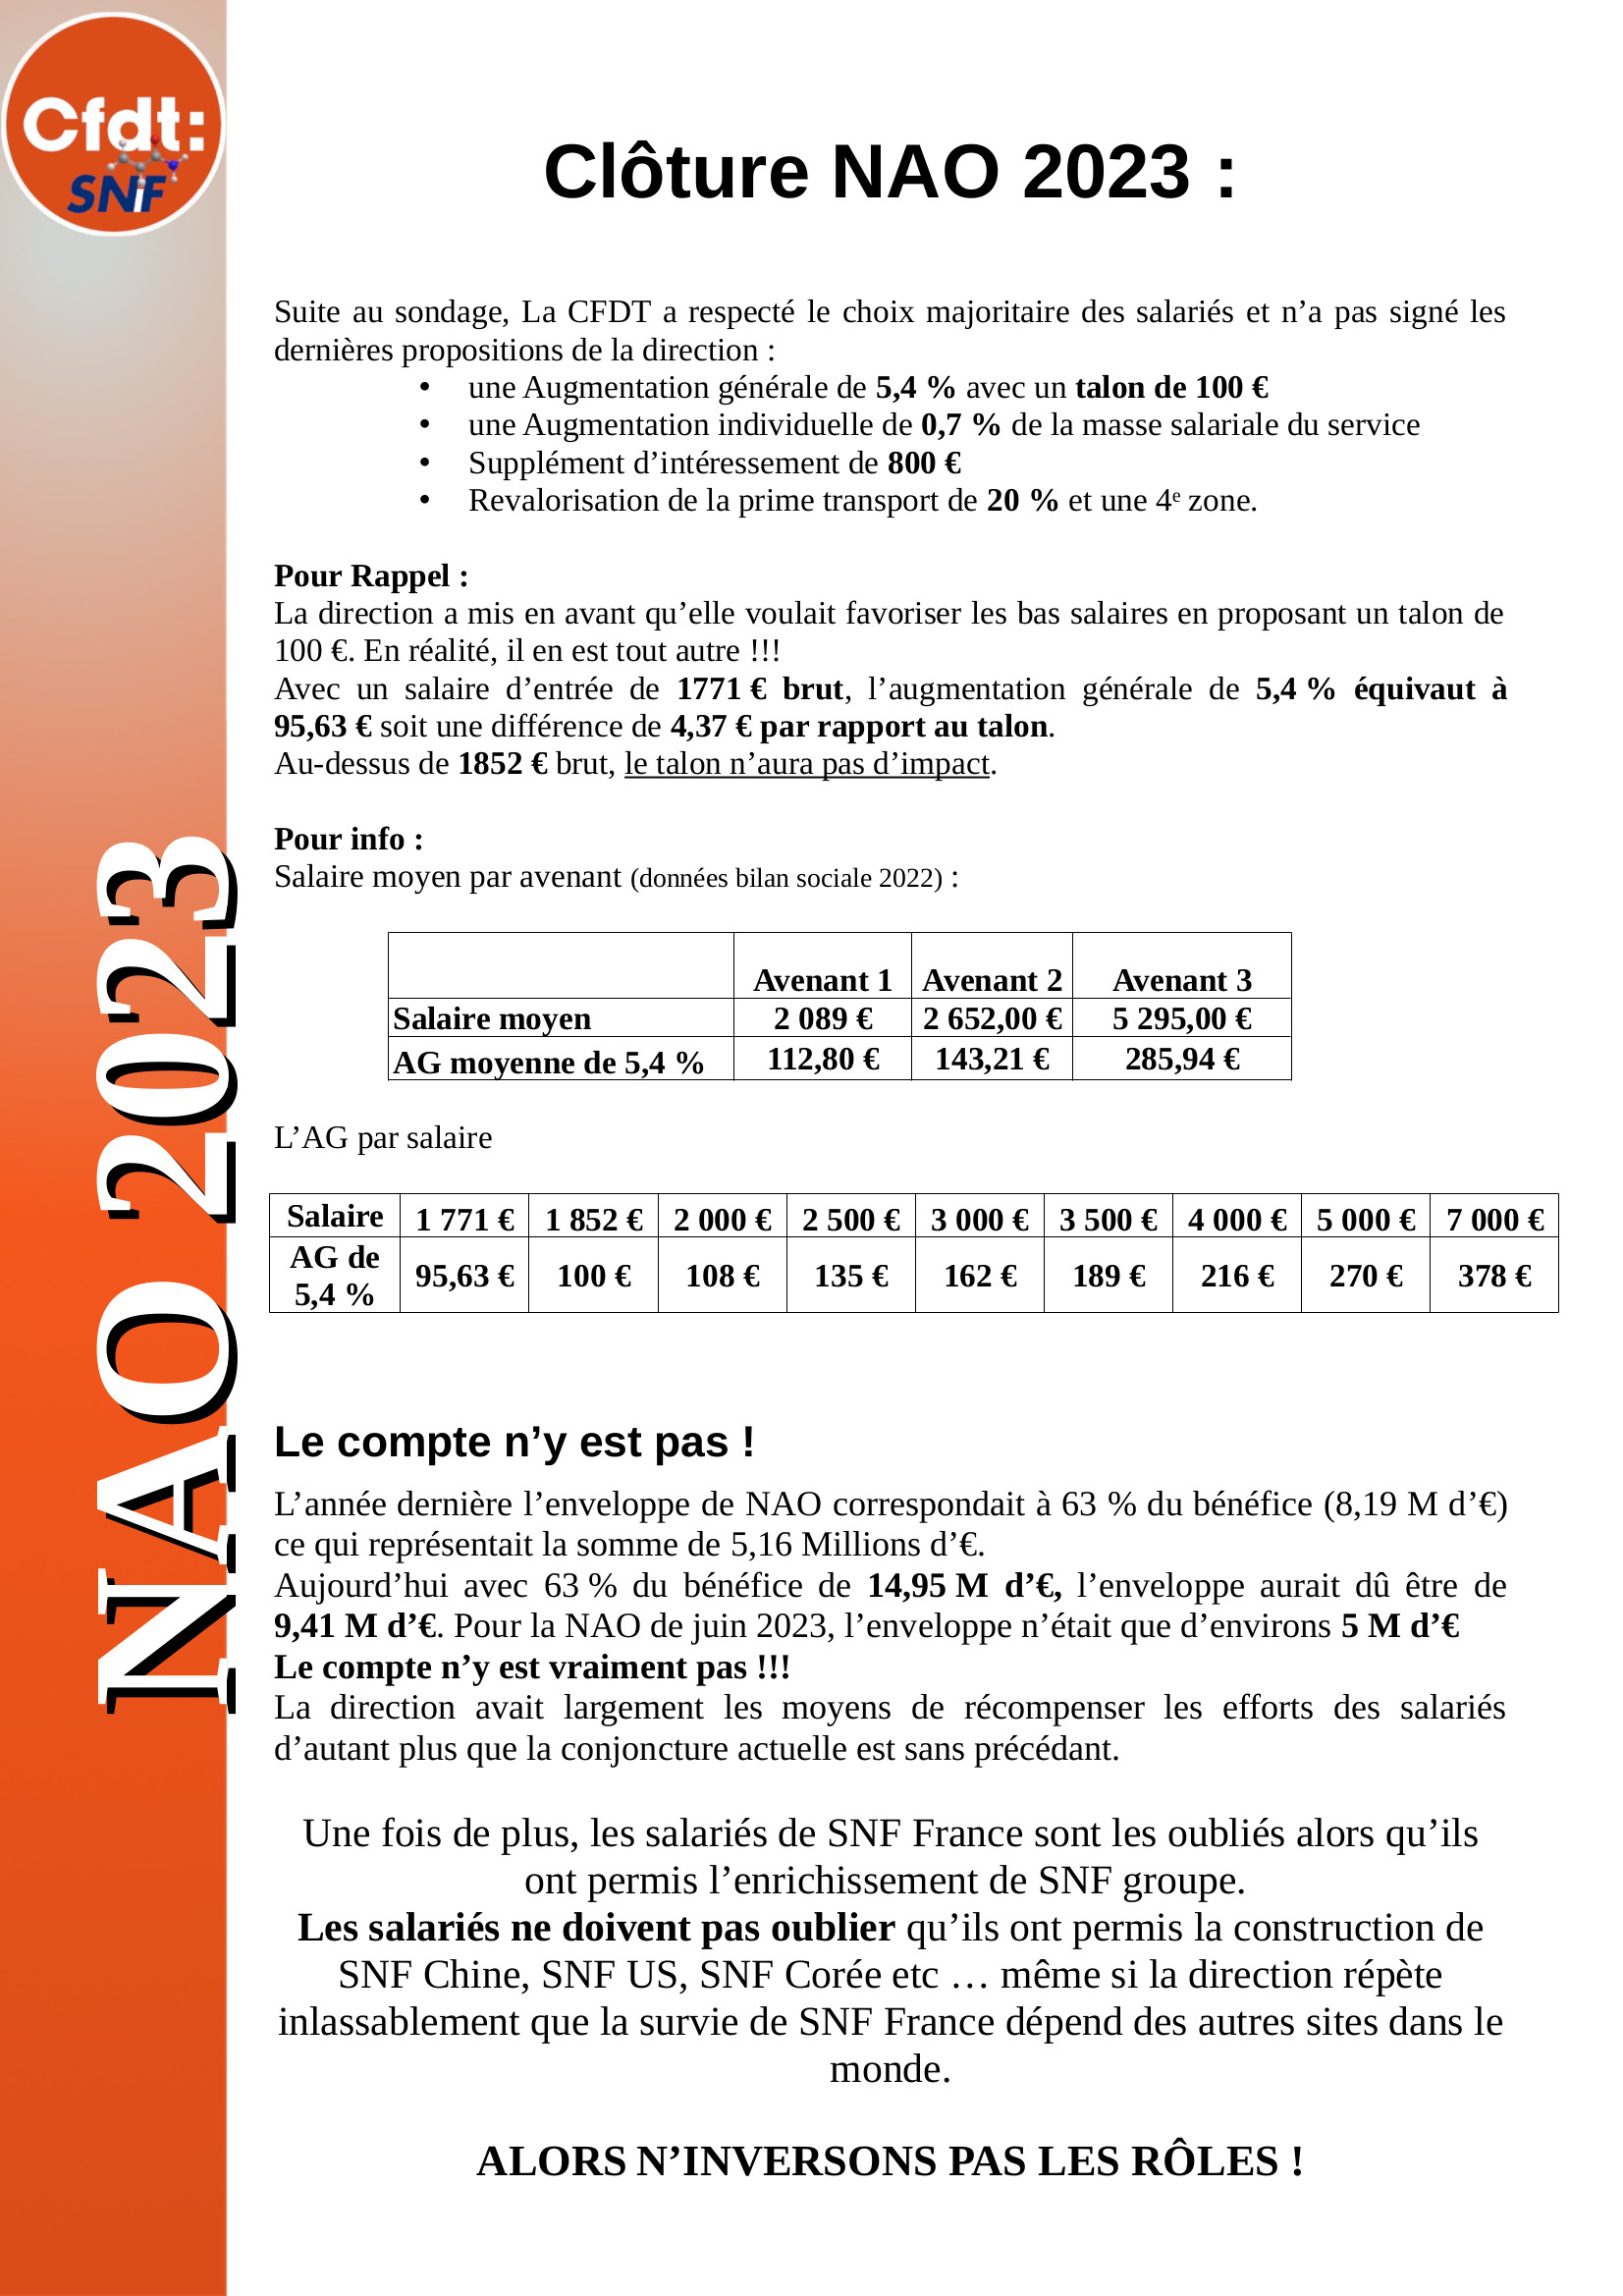 tract commentaires final NAO 2023 V3.1